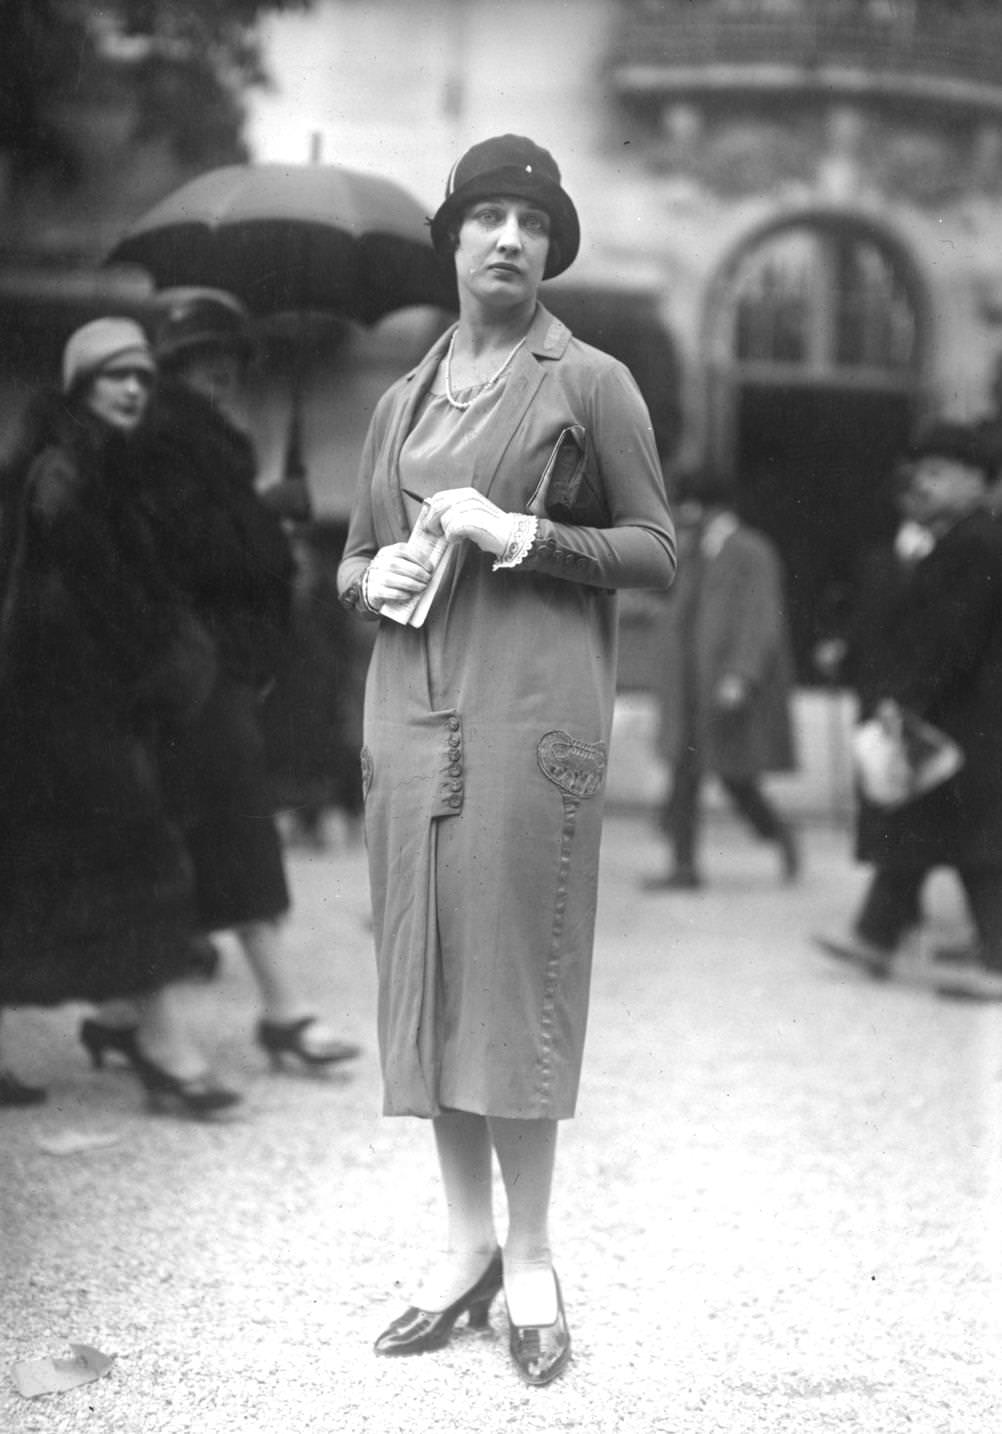 A model stands in the rain, wearing a linen tunic coat with buttoned panel at hip height, and a cloche hat with small brim, 1925